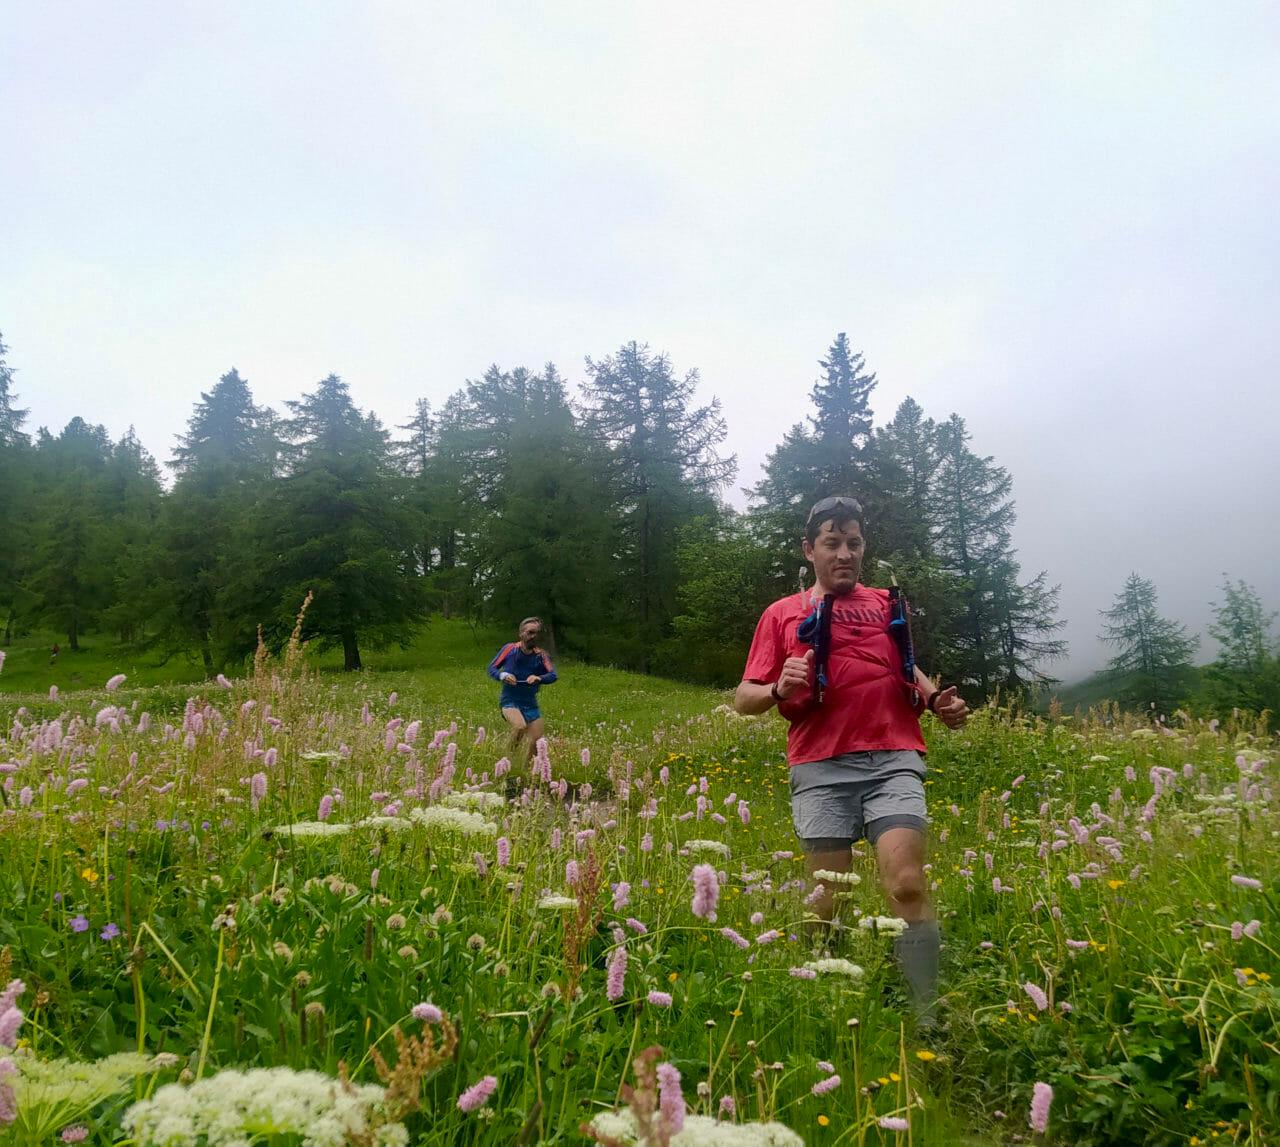 Two male trail runners moving through a pasture with fog in the background